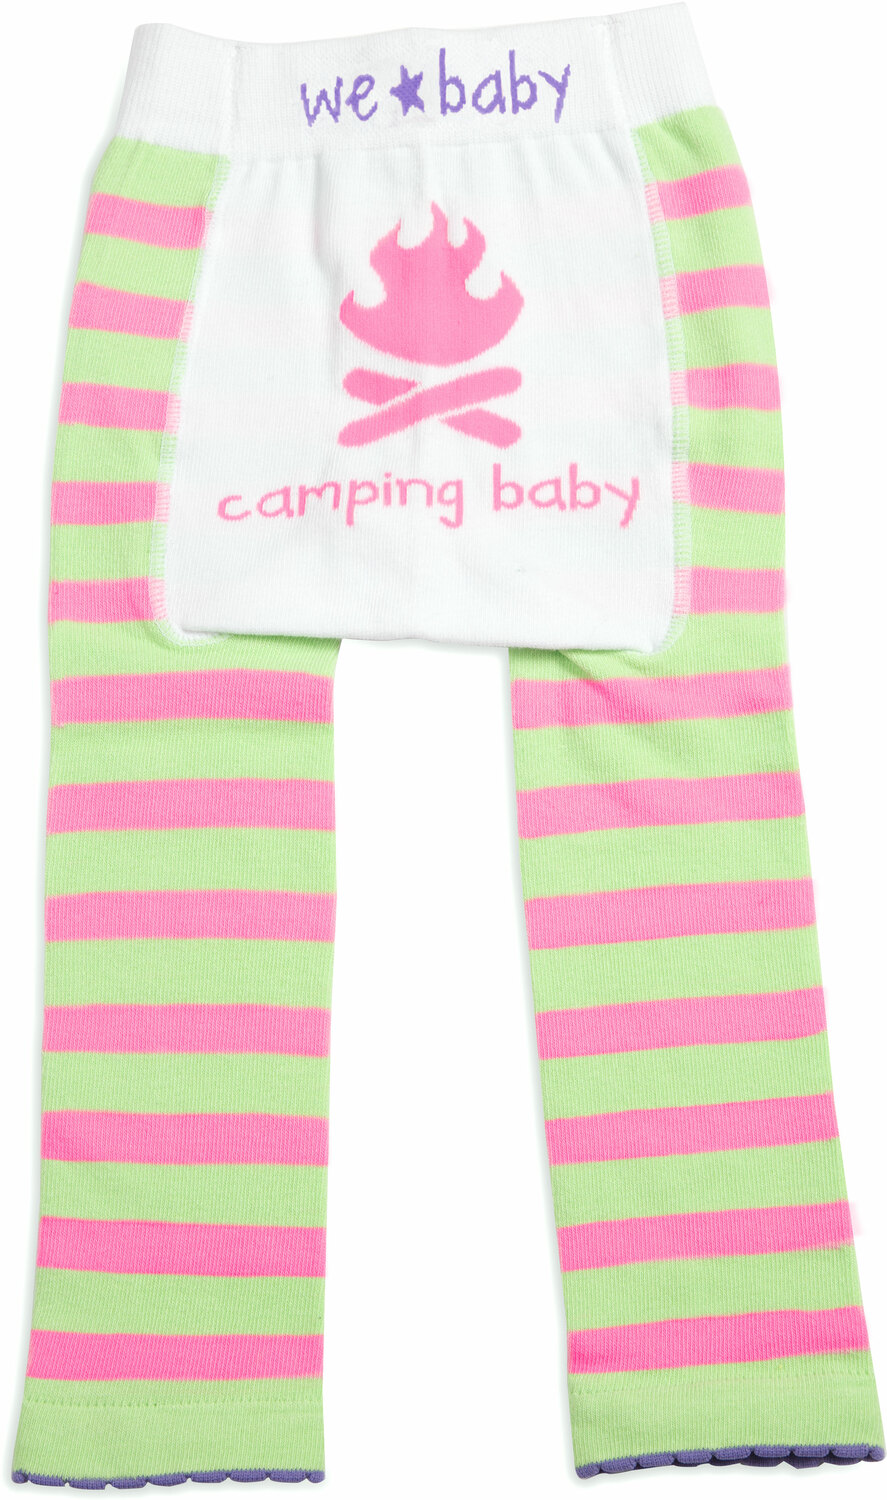 Camping Baby by We Baby - Camping Baby - 6-12 Months Baby Leggings